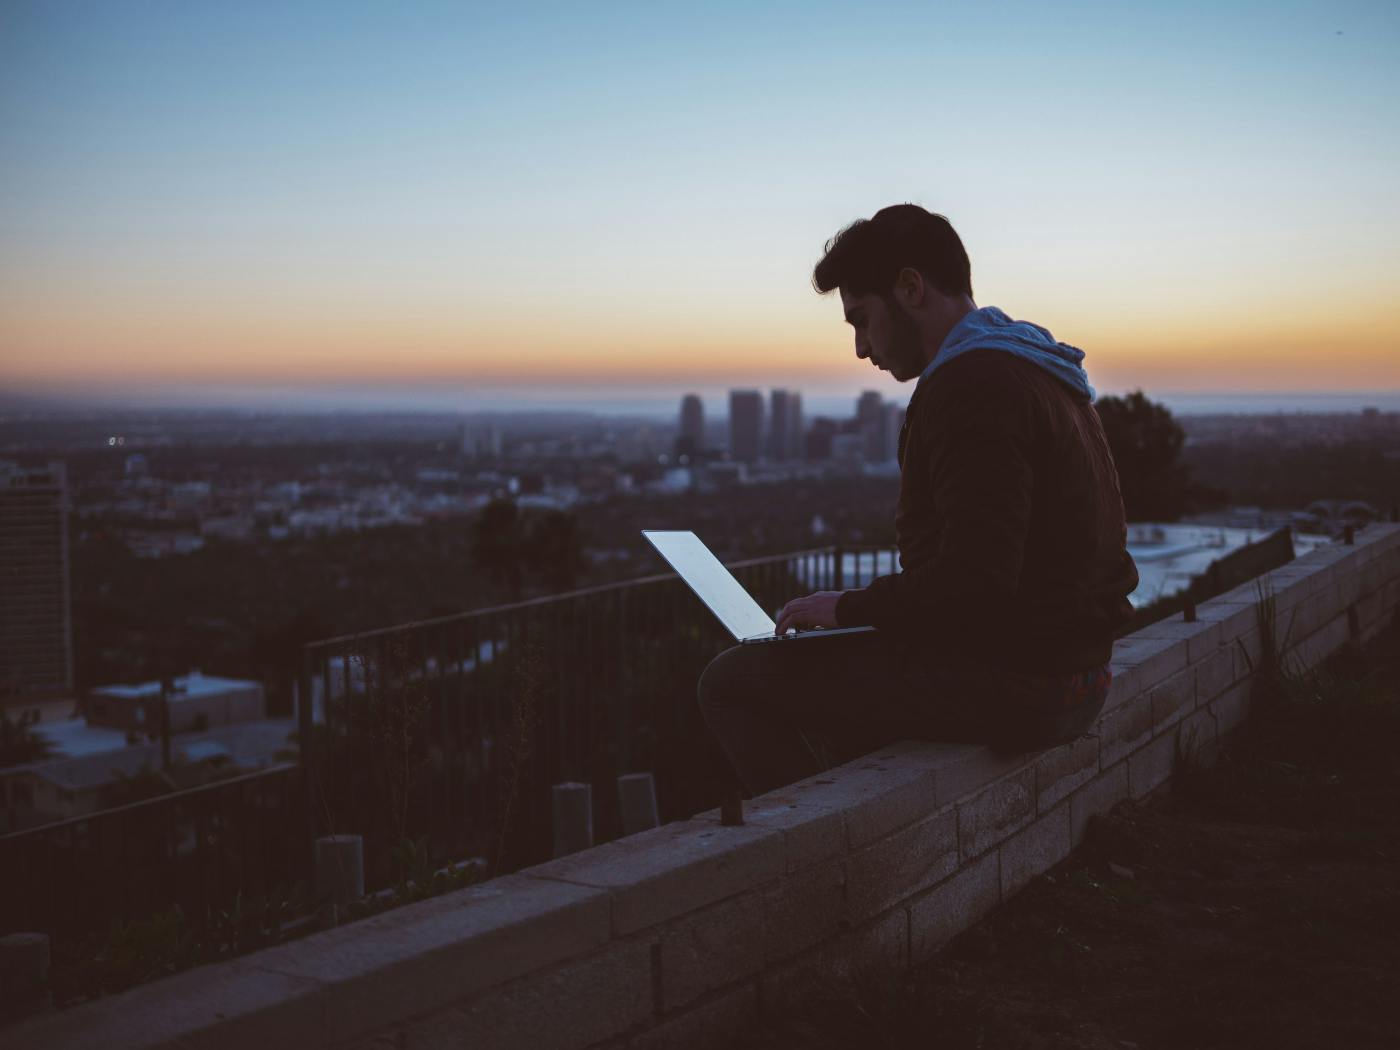 A guy sitting on the edge of a wall with a cityscape behind him working on a laptop.